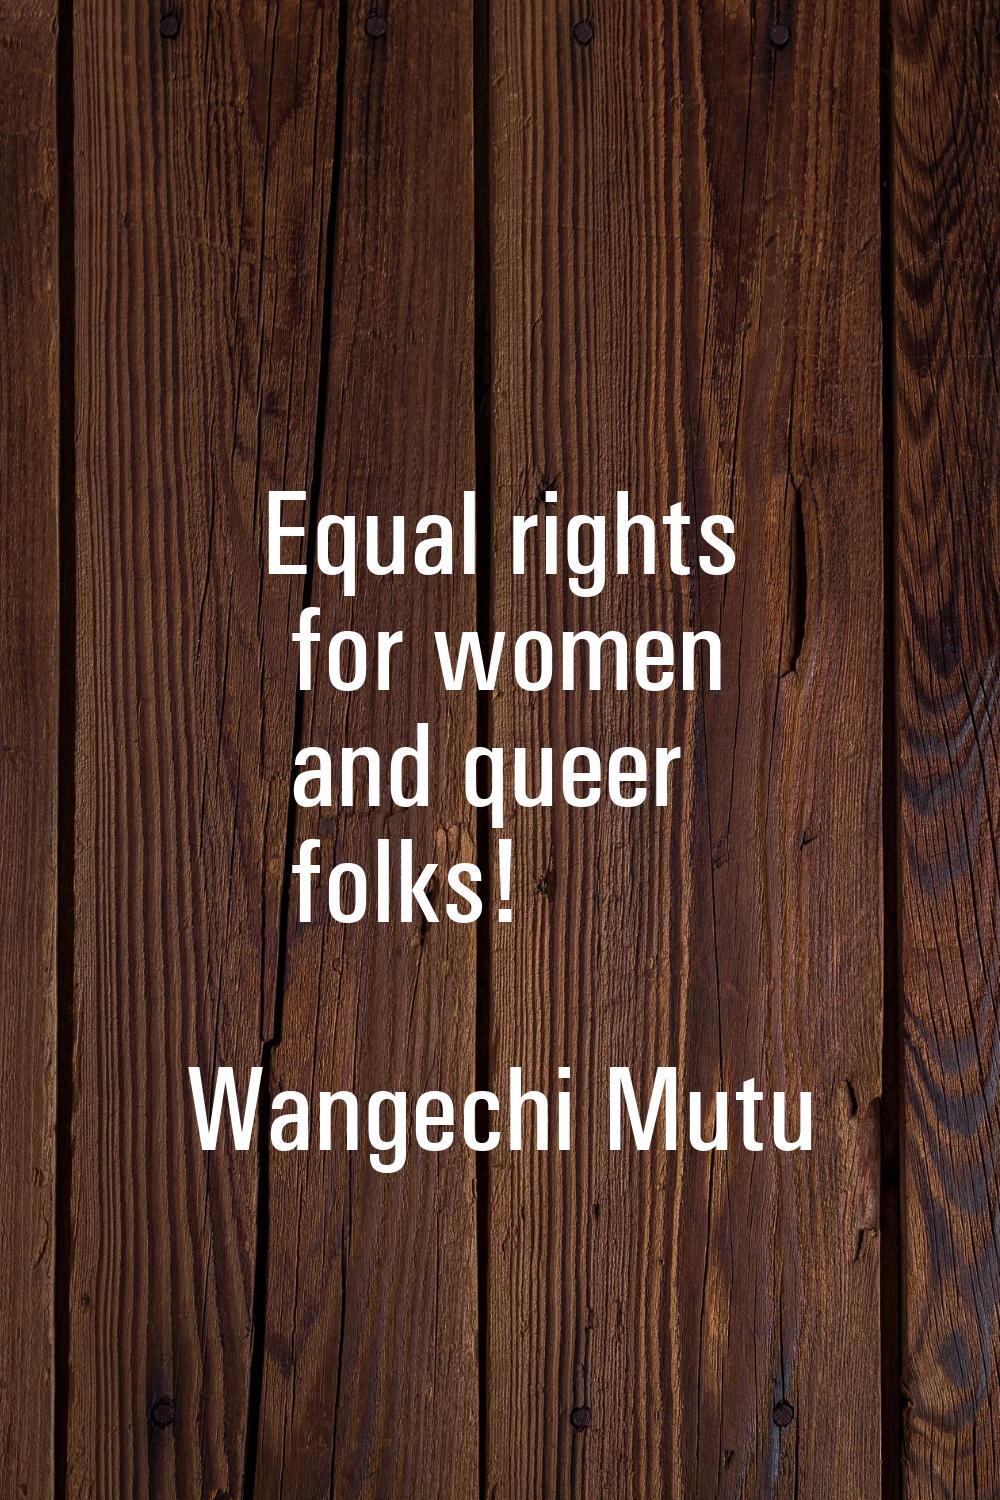 Equal rights for women and queer folks!